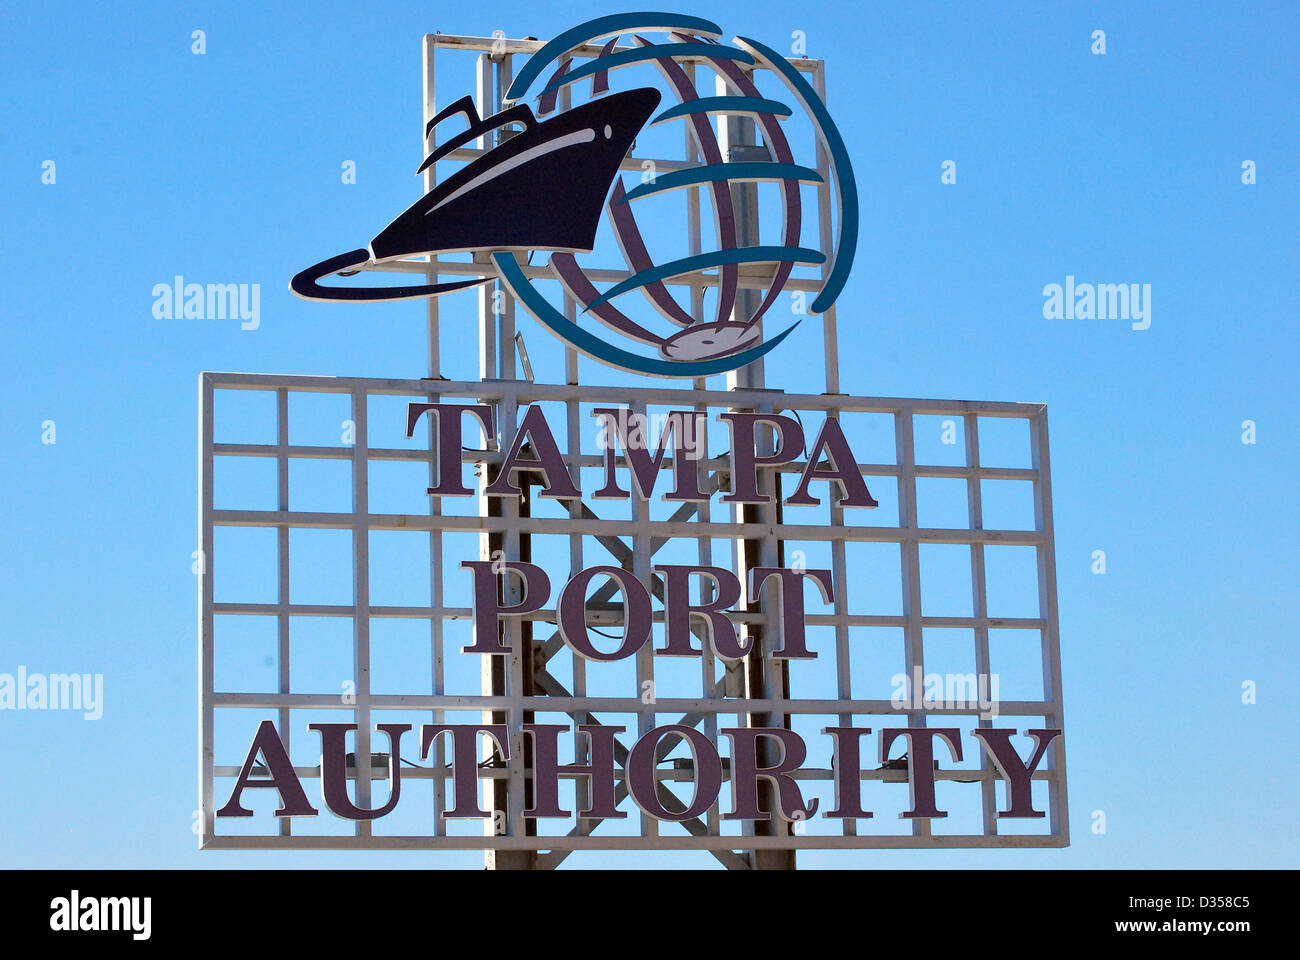 Tampa Port Authority Sign. Stock Photo